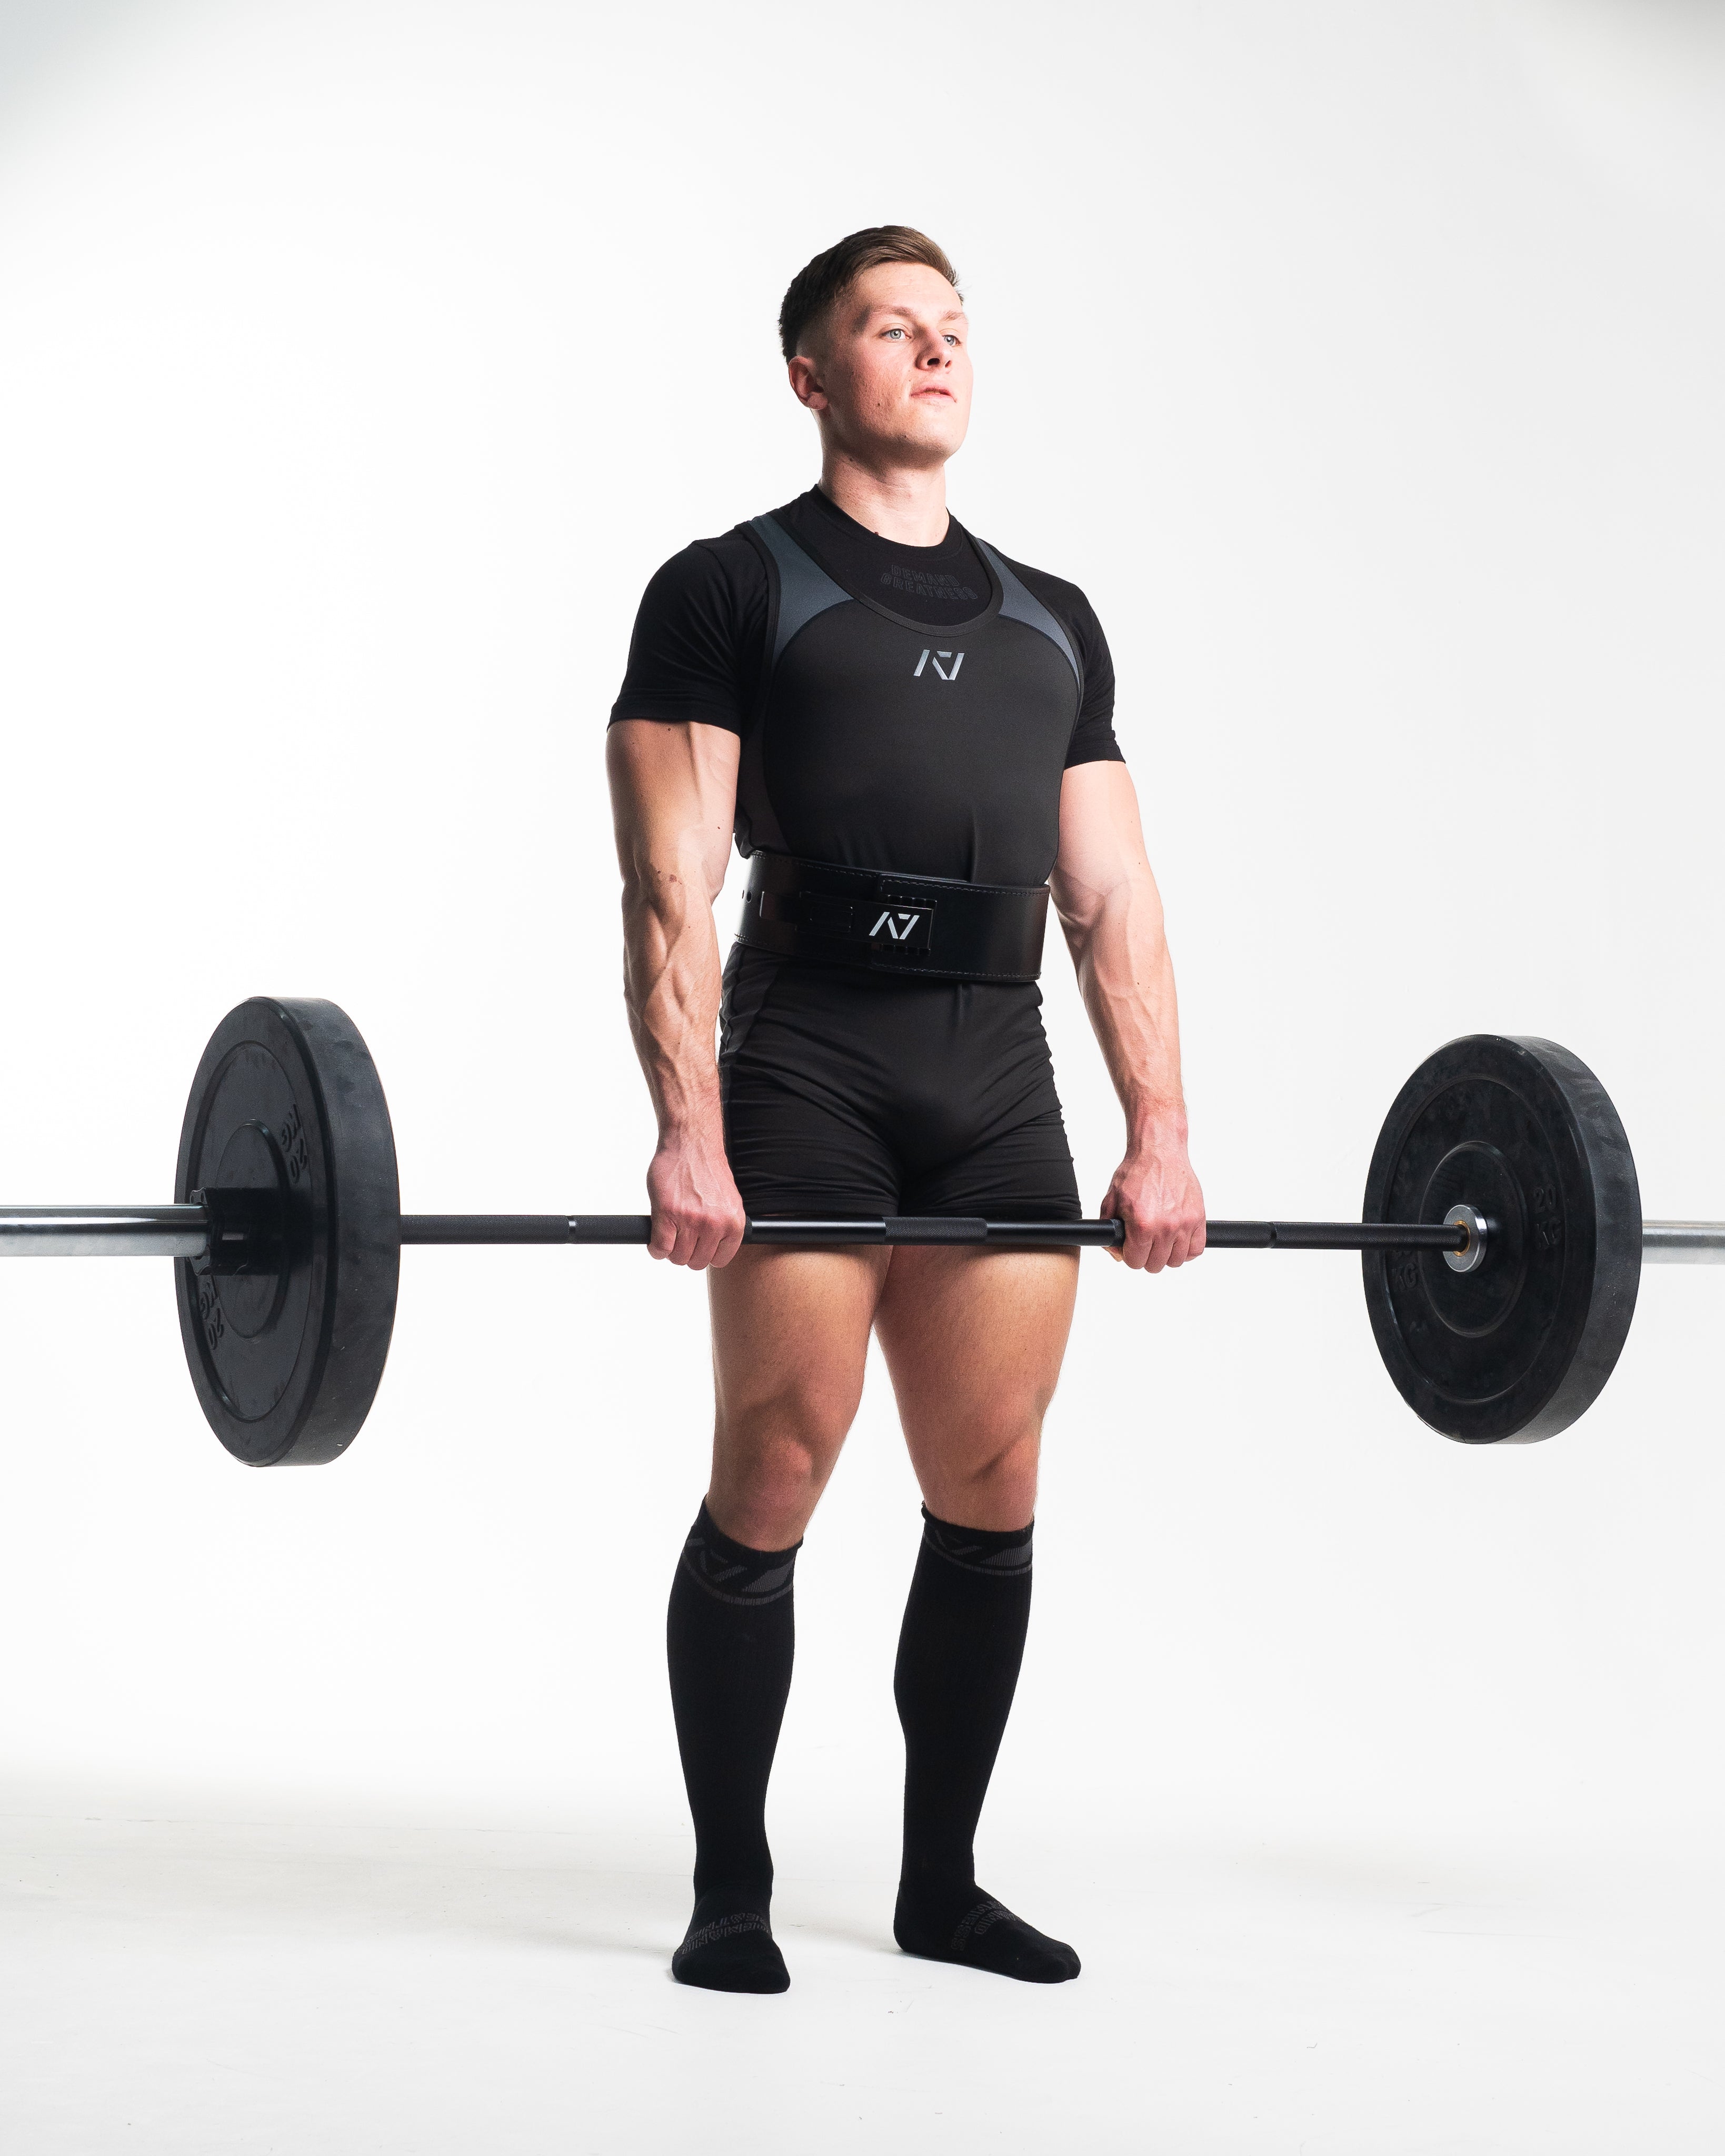 A7 Shadow Stone Deadlift socks are designed specifically for pulls and keep your shins protected from scrapes. A7 deadlift socks are a perfect pair to wear in training or powerlifting competition. The IPF Approved Kit includes Powerlifting Singlet, A7 Meet Shirt, A7 Zebra Wrist Wraps, A7 Deadlift Socks, Hourglass Knee Sleeves (Stiff Knee Sleeves and Rigor Mortis Knee Sleeves). Genouillères powerlifting shipping to France, Spain, Ireland, Germany, Italy, Sweden and EU.